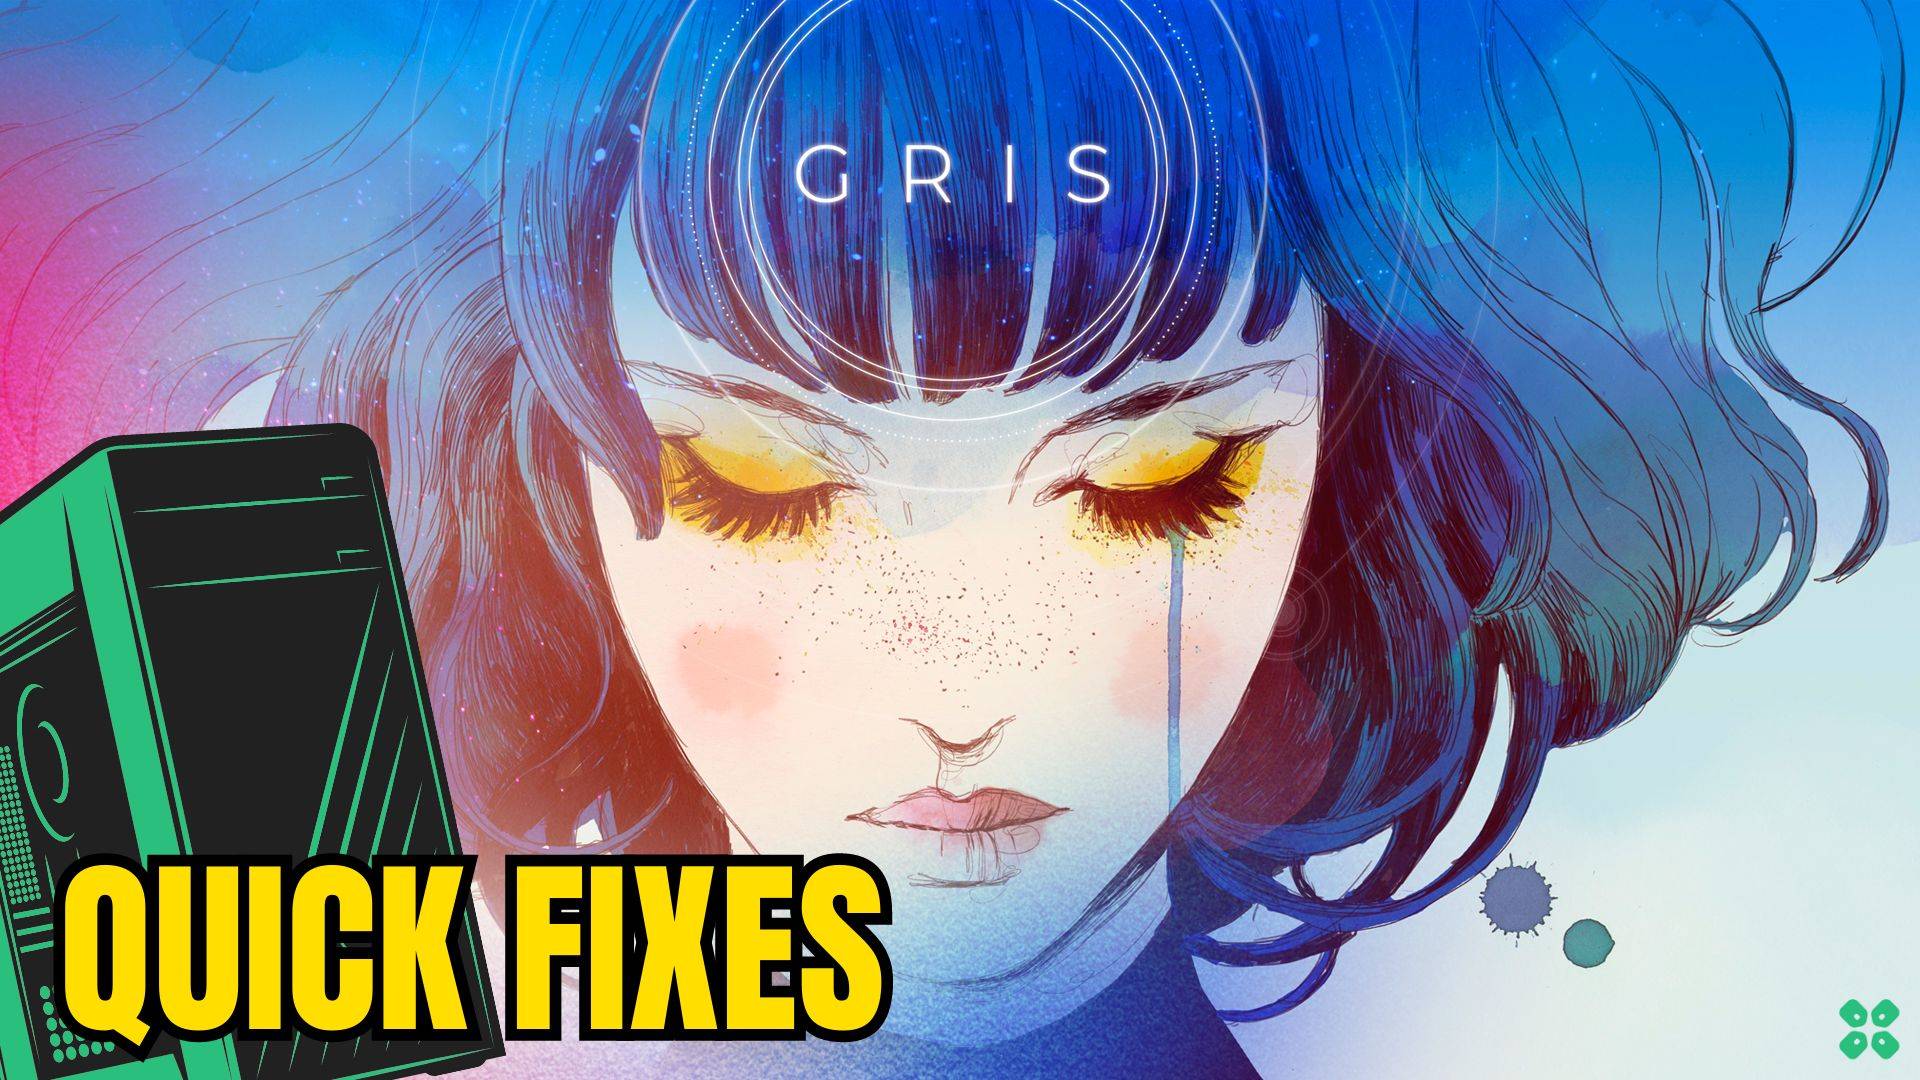 Artwork of Gris and its fix of crashing by TCG